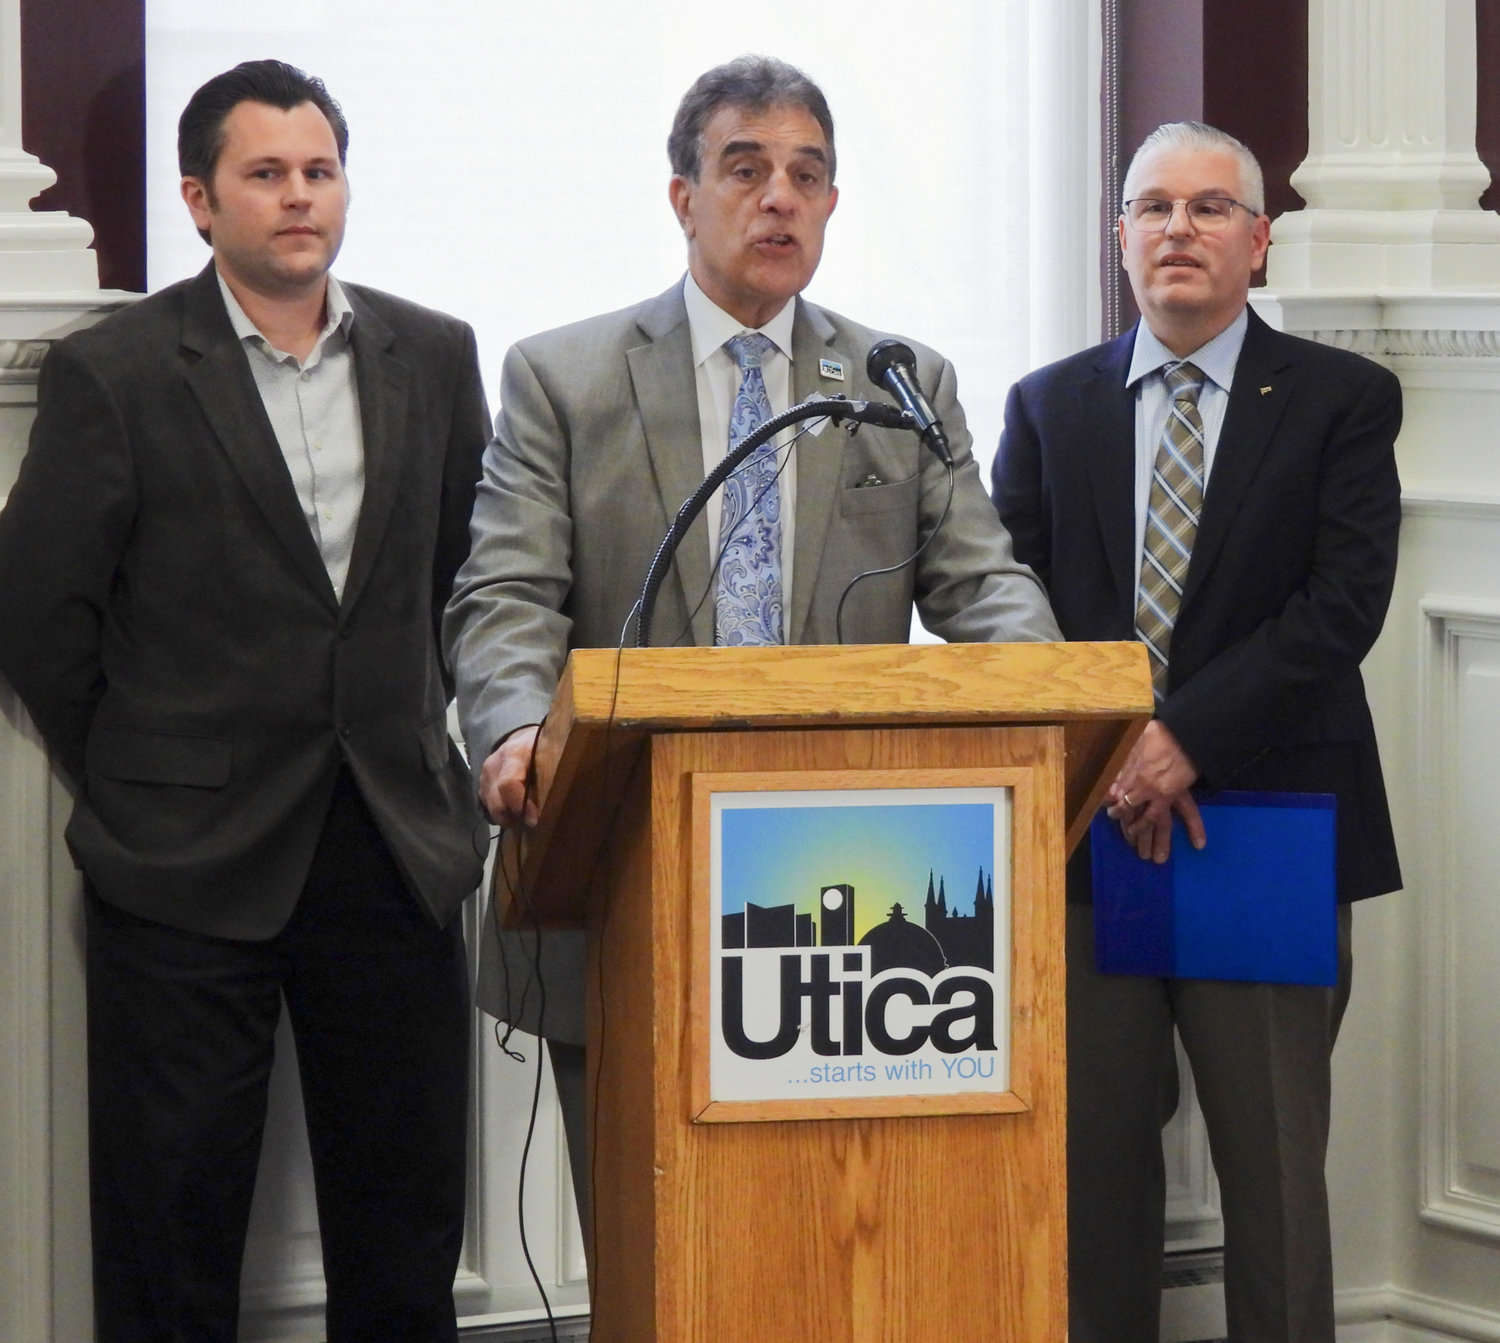 Utica Mayor Robert Palmieri thanks Barton & Loguidice for their commitment and investment in Utica at a press conference on Monday at the B & L's new office at 70 Genesee Street in Utica, formerly the Commercial Travelers building.